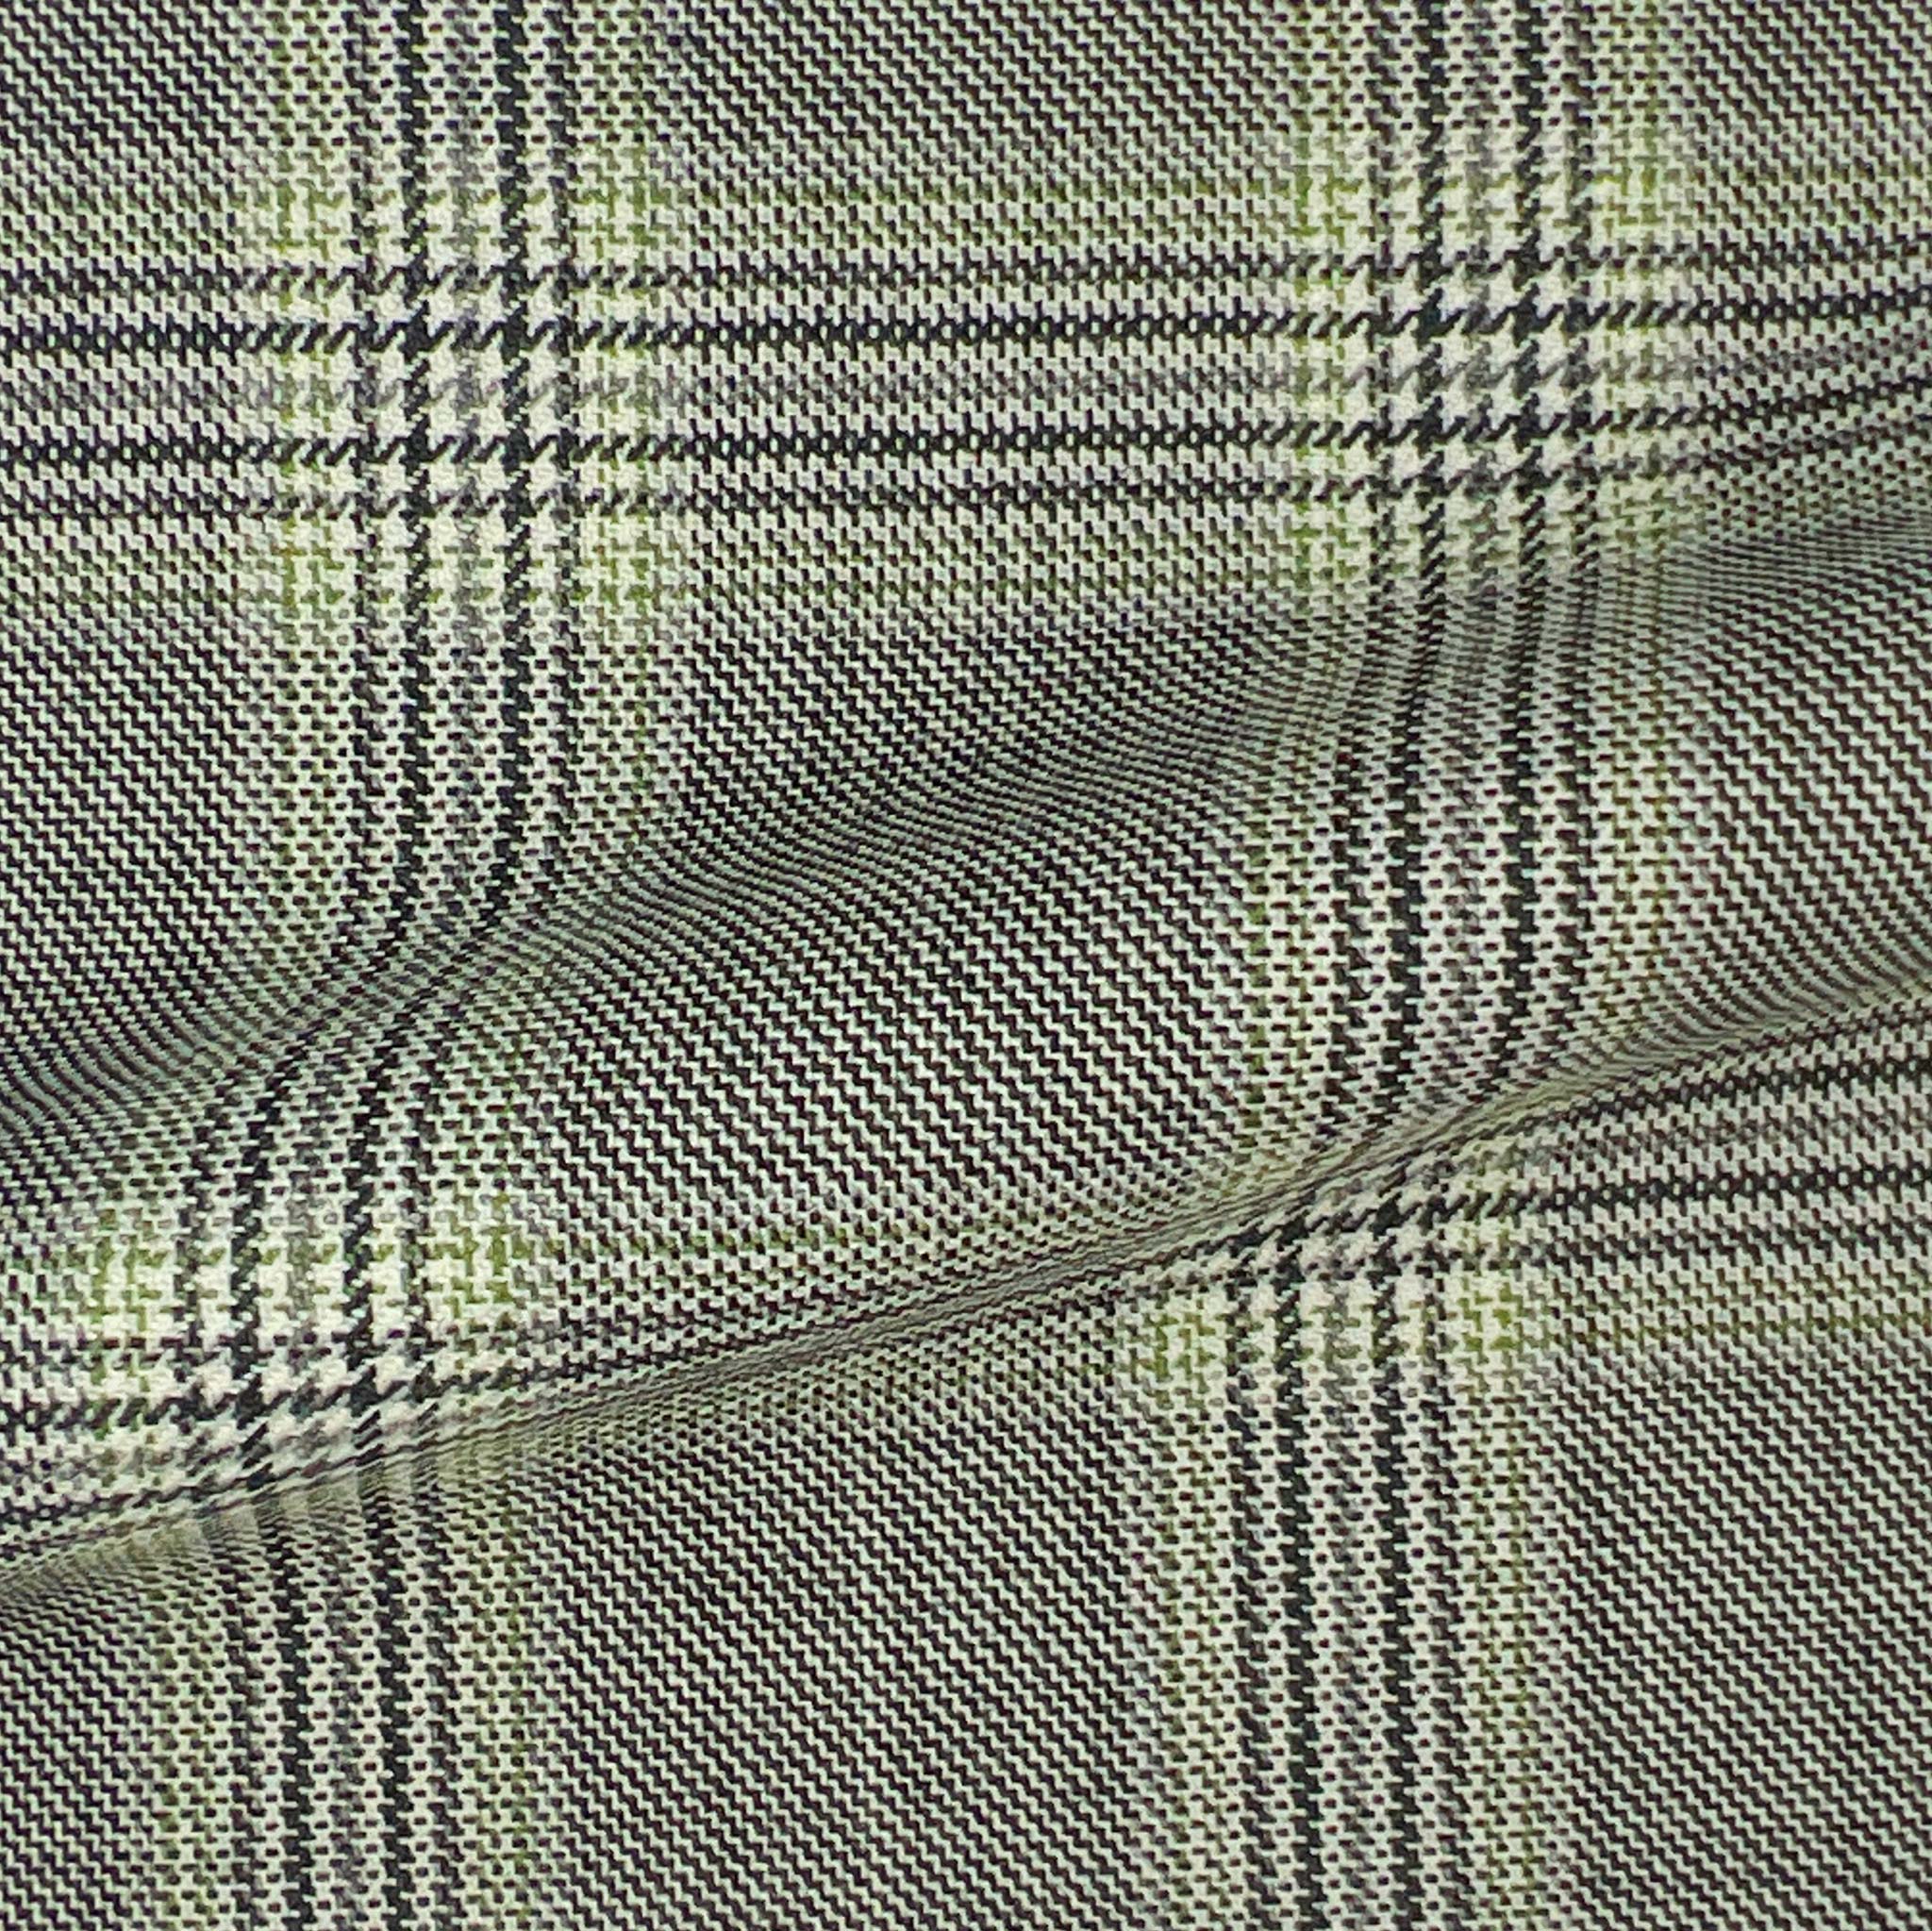 Westwood Hart Online Custom Hand Tailor Suits Sportcoats Trousers Waistcoats Overcoats Steel Grey Prince Of Wales Plaid Lime Green Windowpane